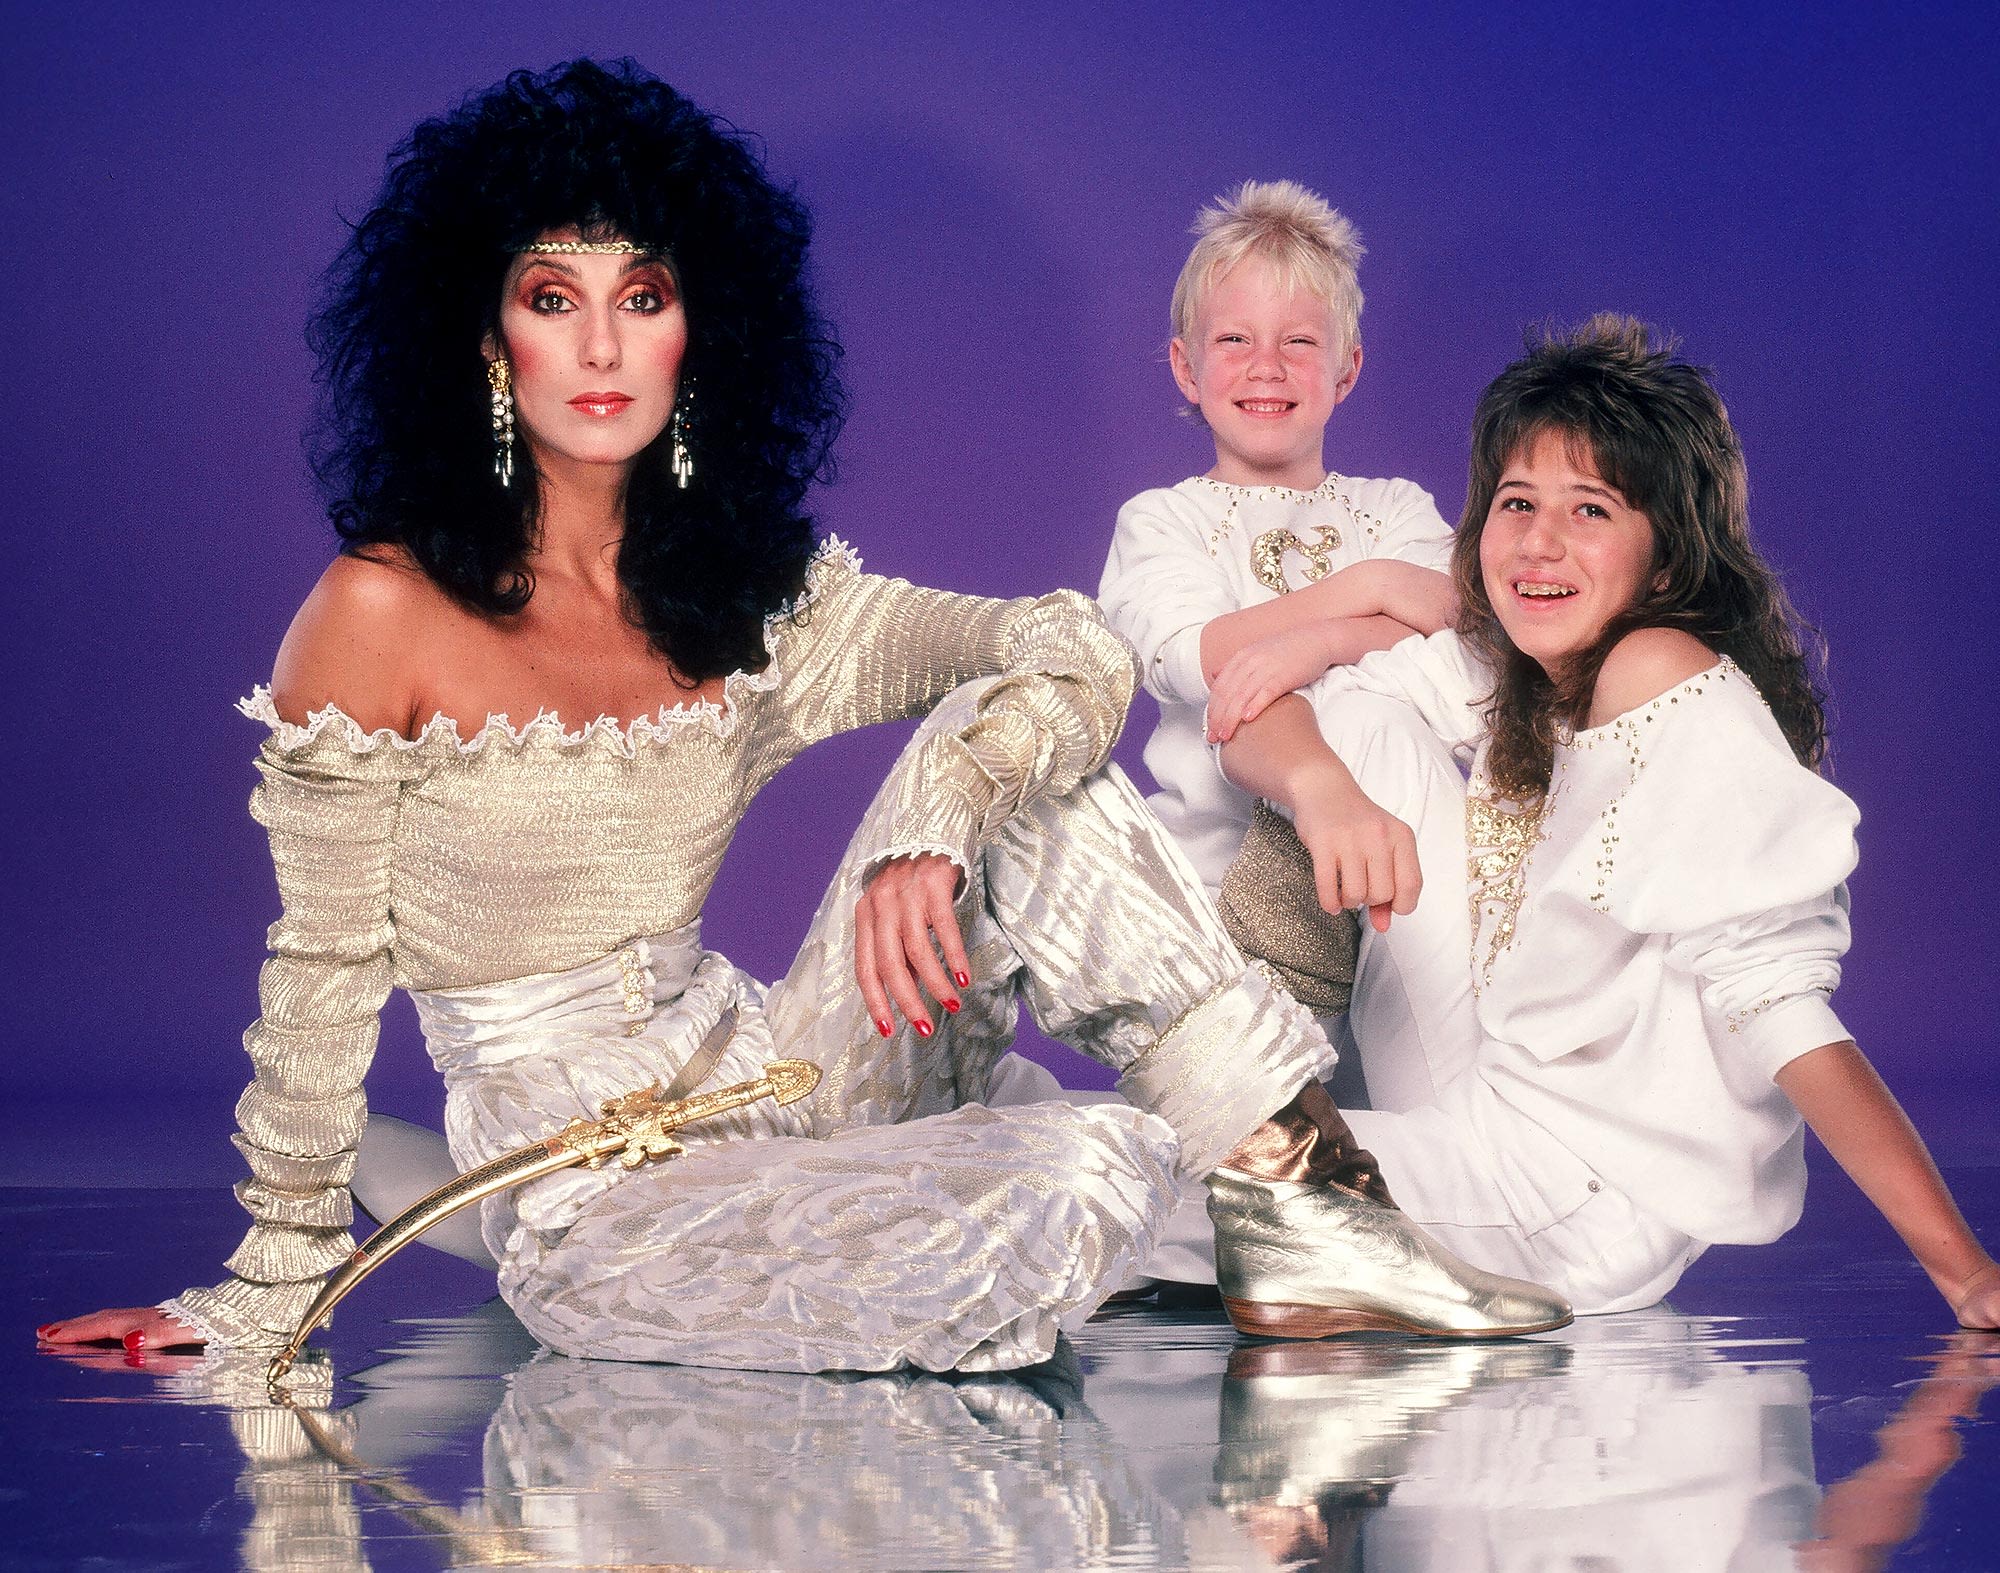 Cher and Son Elijah Blue Agree to Temporarily Suspend Conservatorship